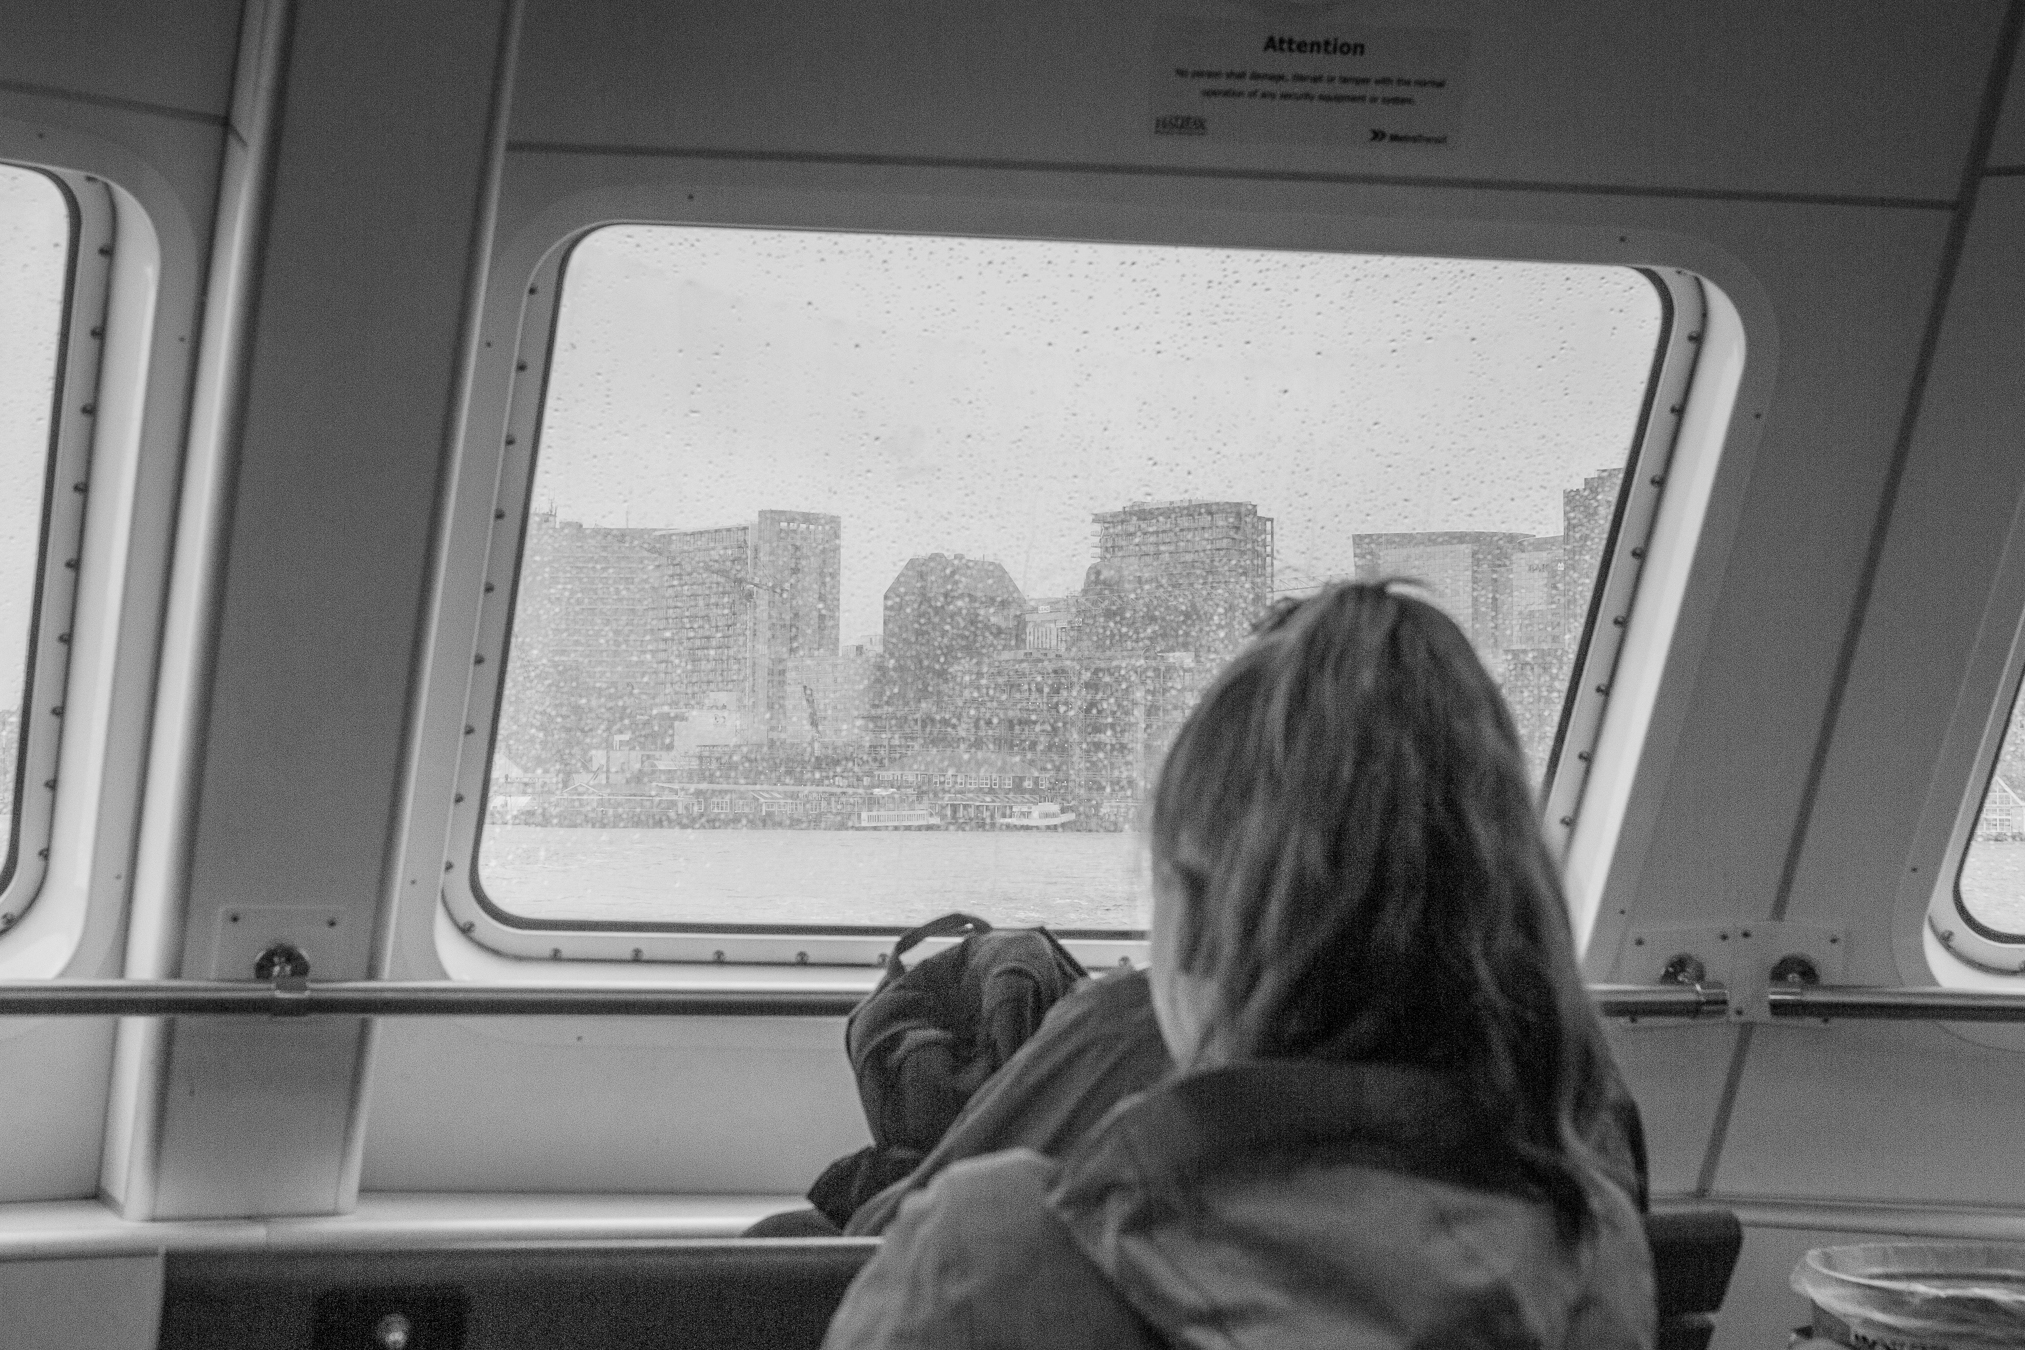 Leaving Halifax on the ferry to dartmouth after a morning of coffee shops and photo editing - Christopher Stannix ferry - Halifax harbour - Halifax, NS